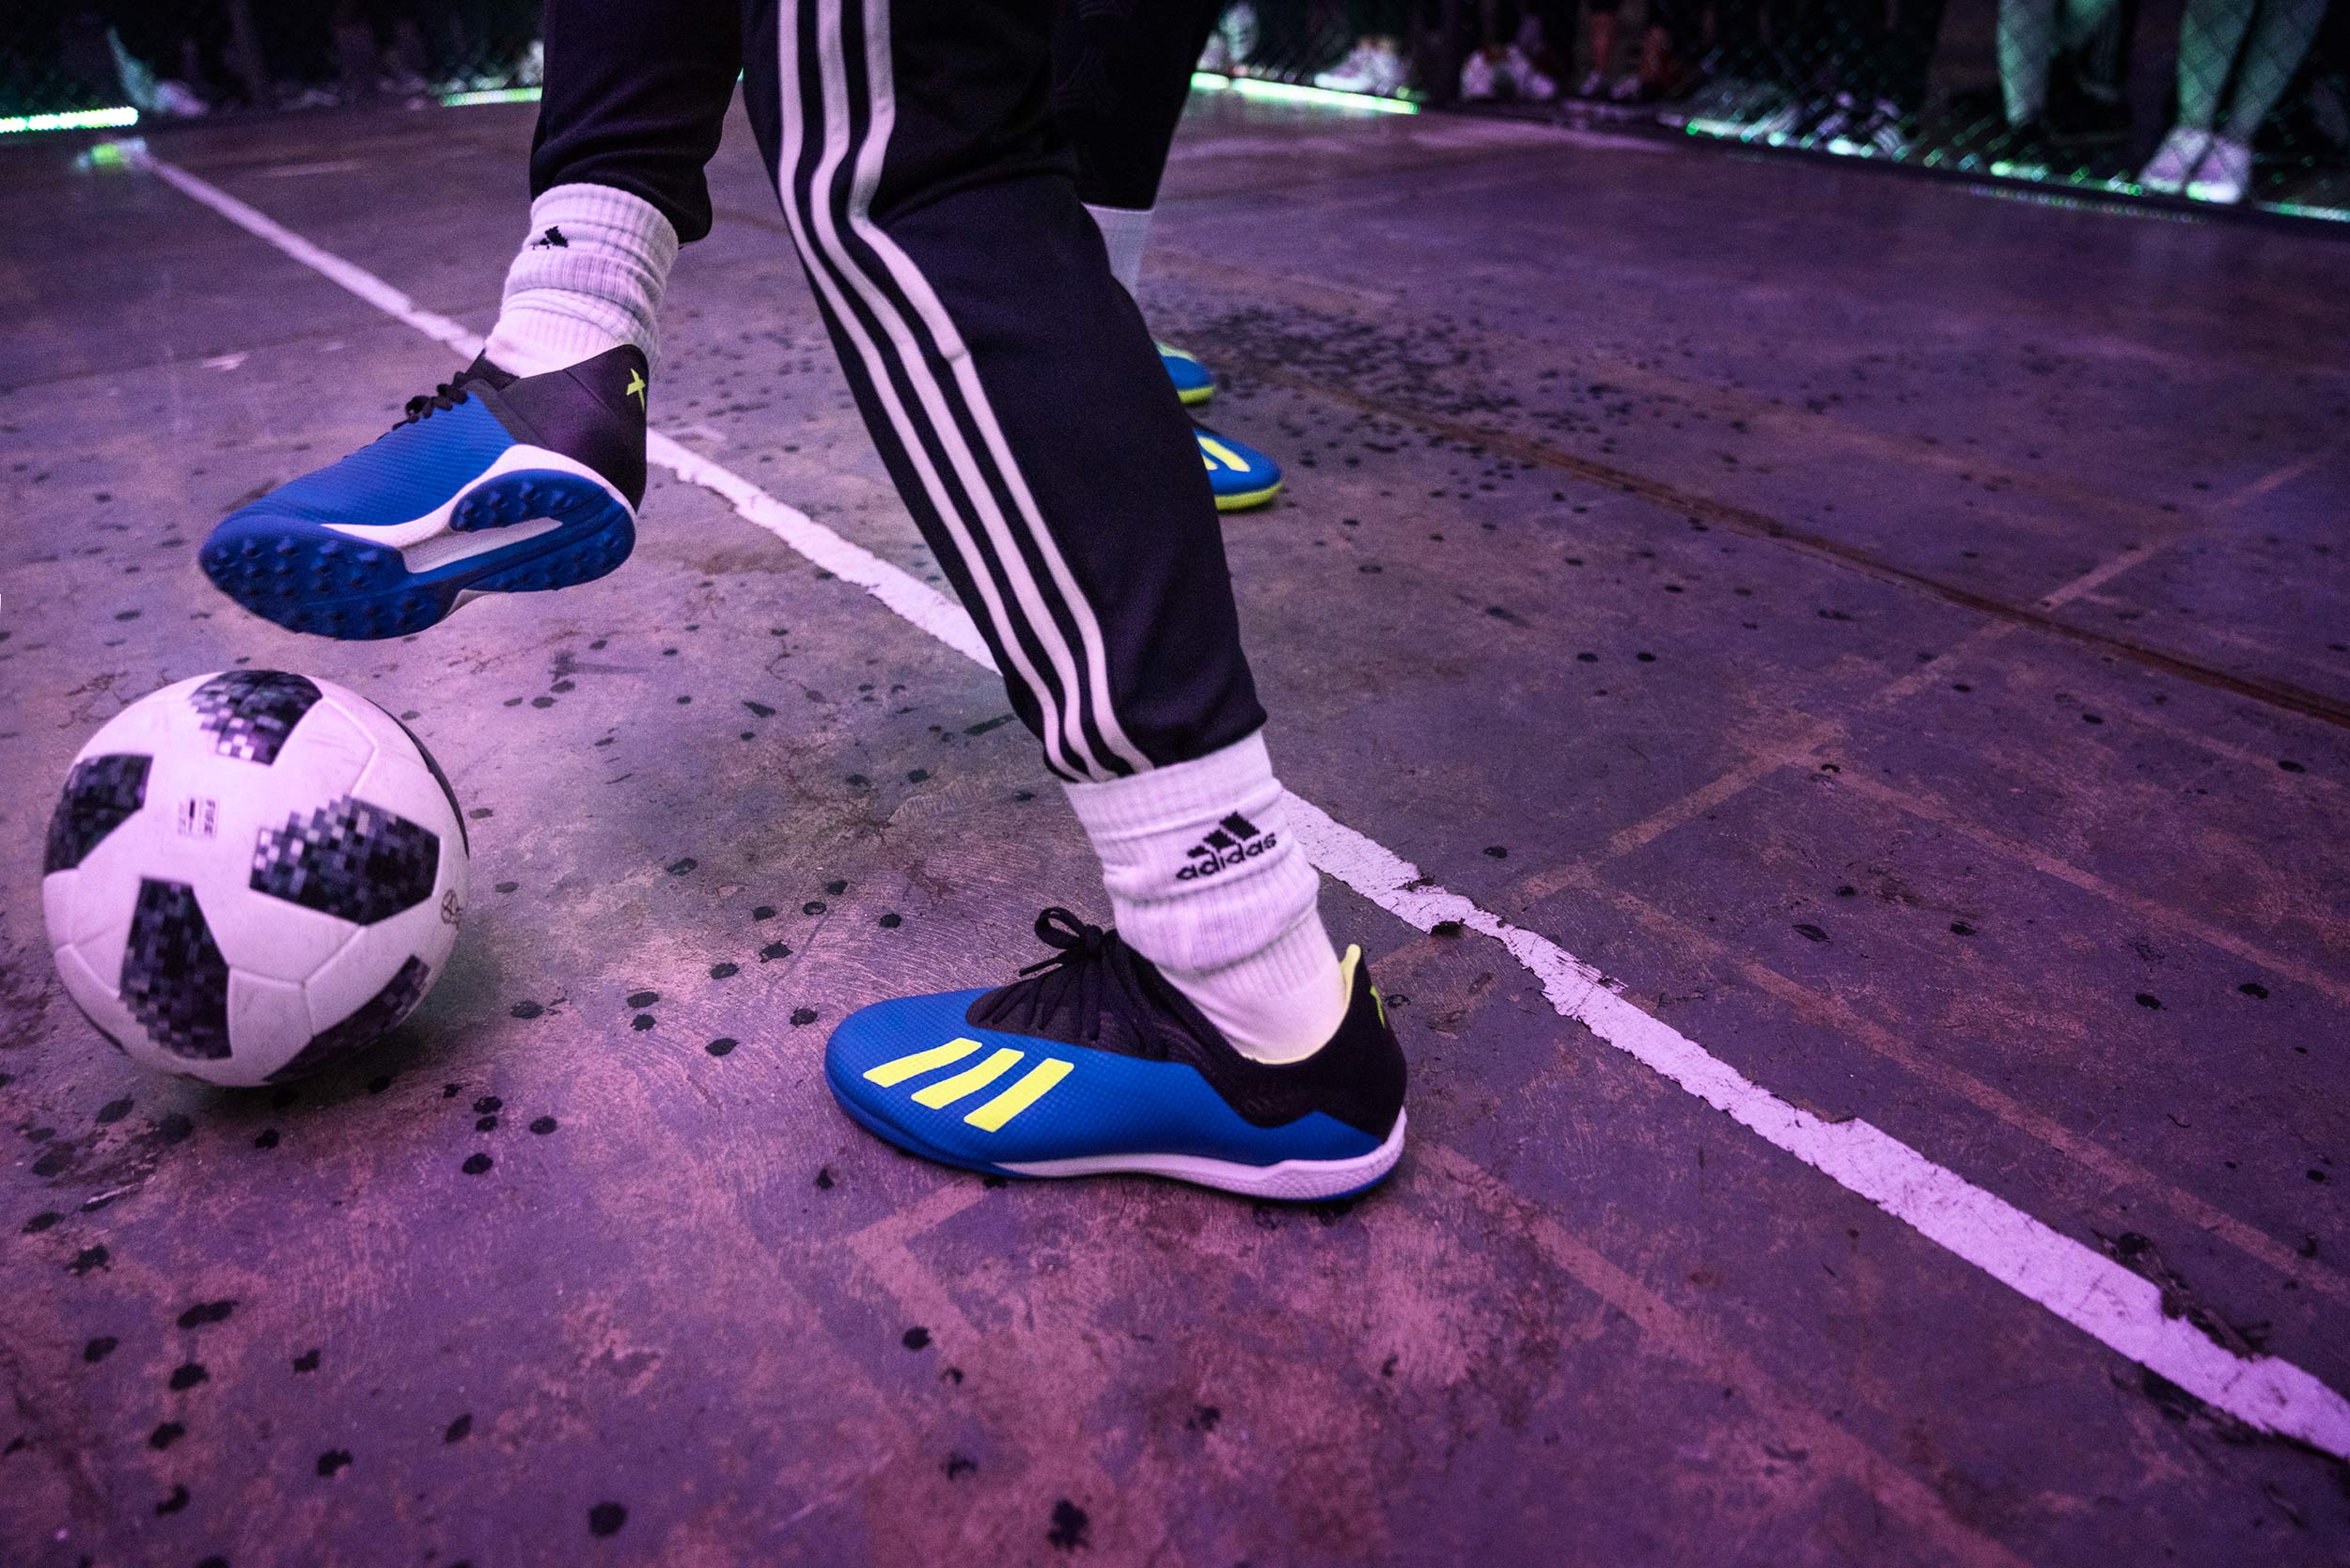 Adidas - Here to Create / Agency: Fiction 